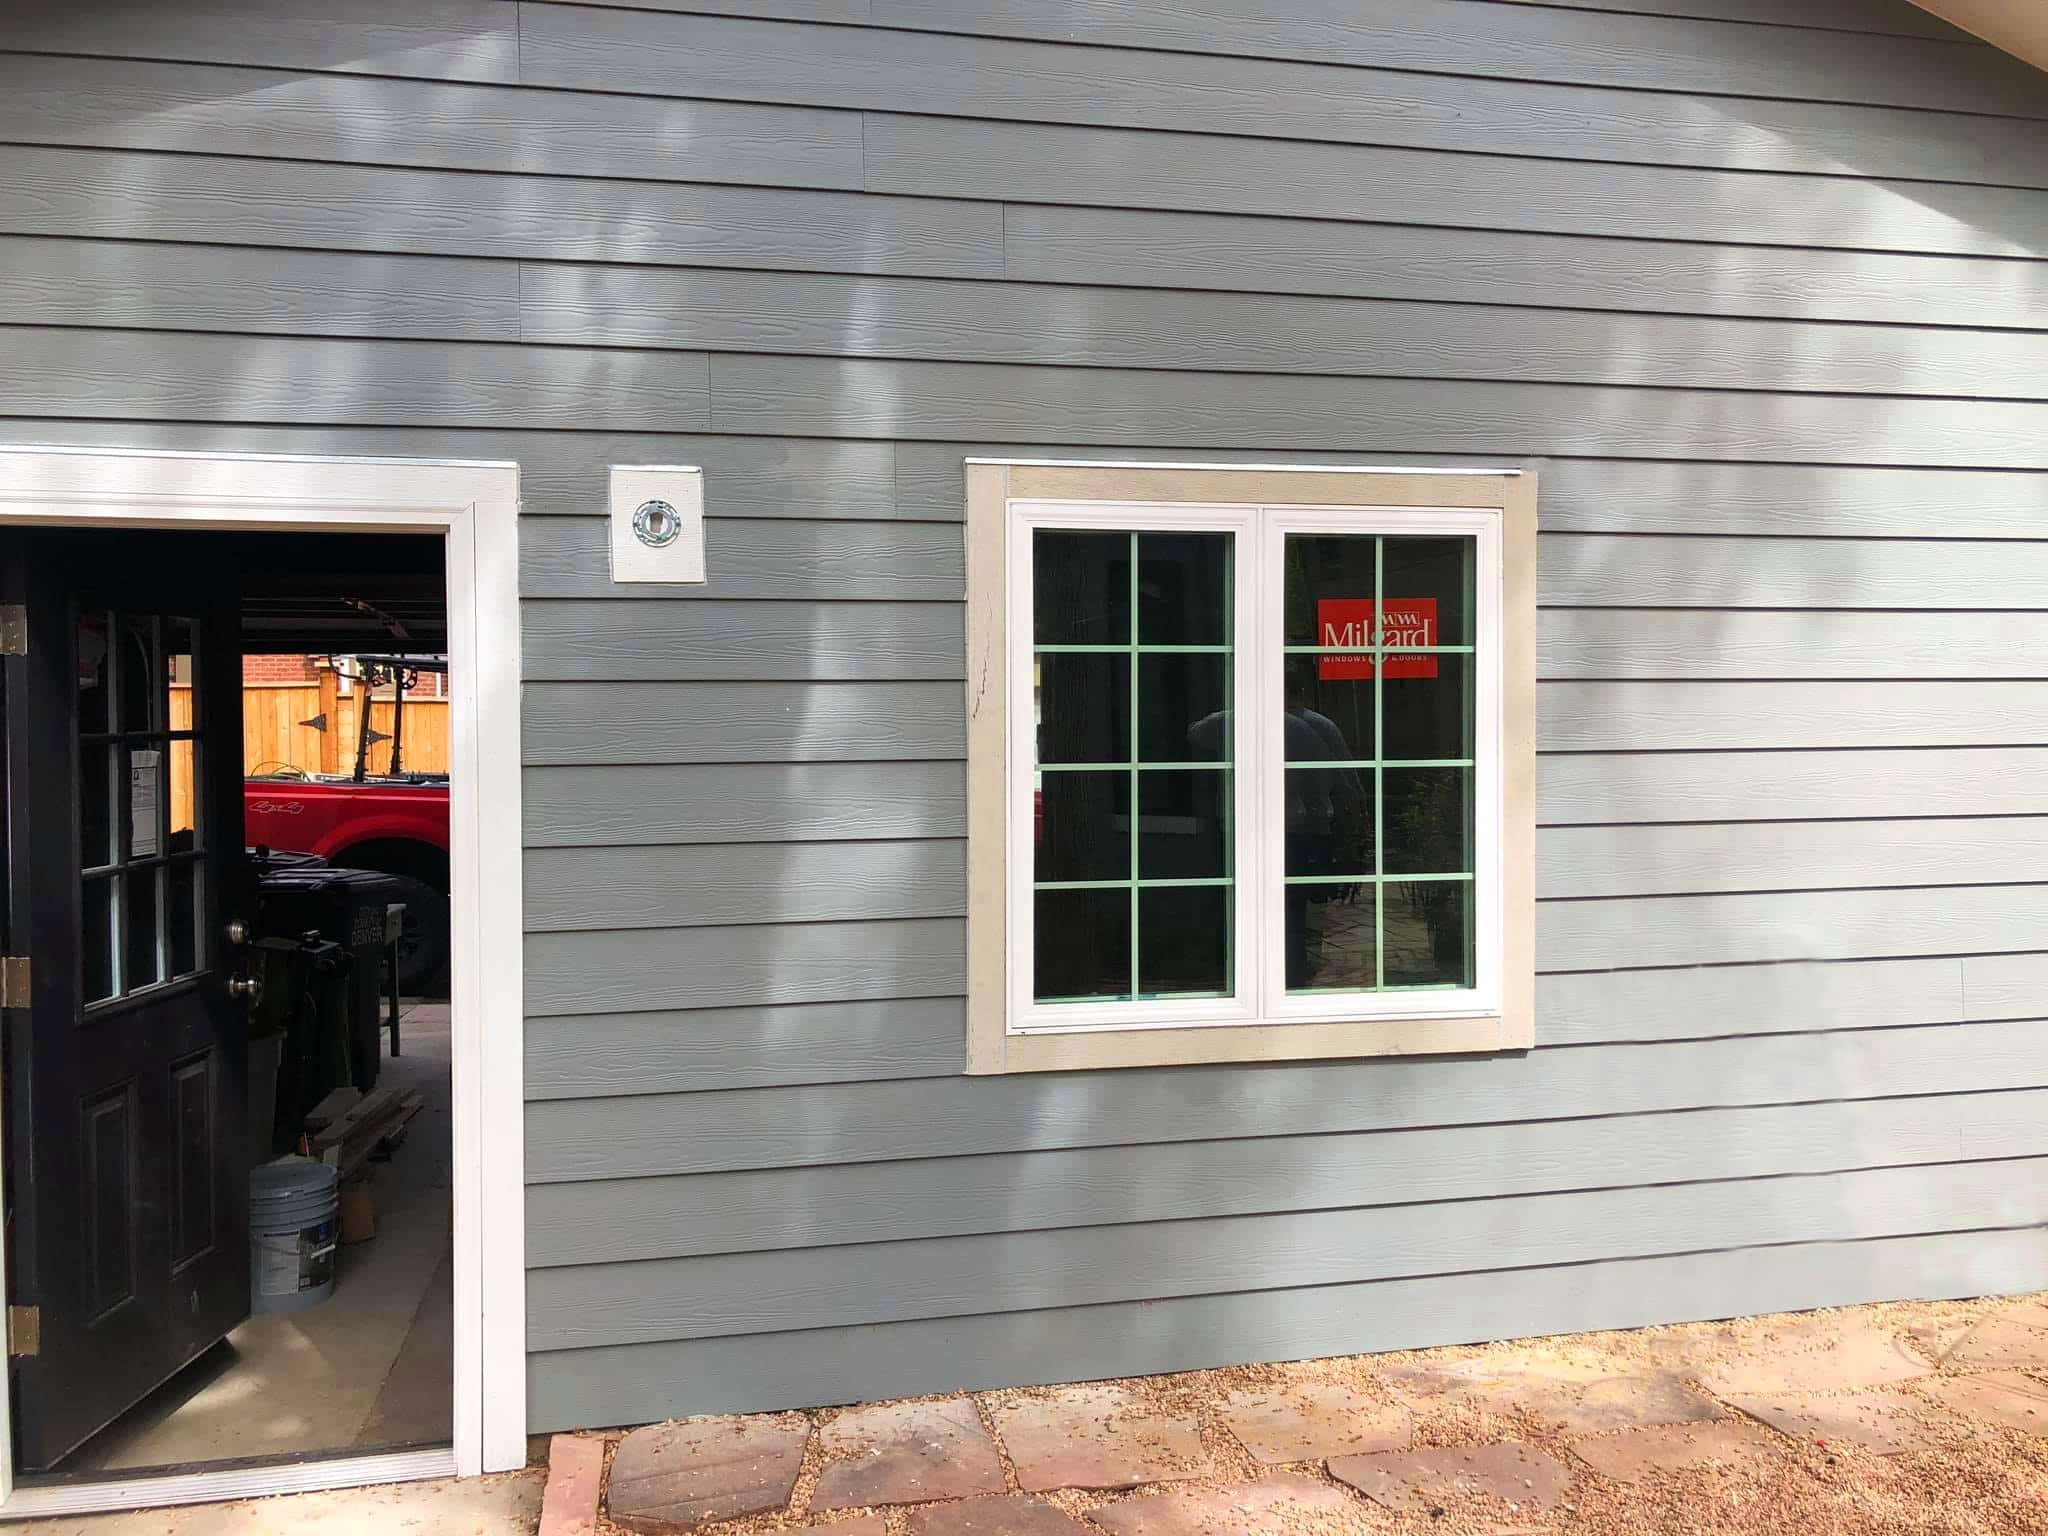 Custom Built Siding and Windows-Residential- Footprint Home Experts proudly serves Colorado Springs, Monument, Castlerock, Denver, Peyton, and Black Forrest.